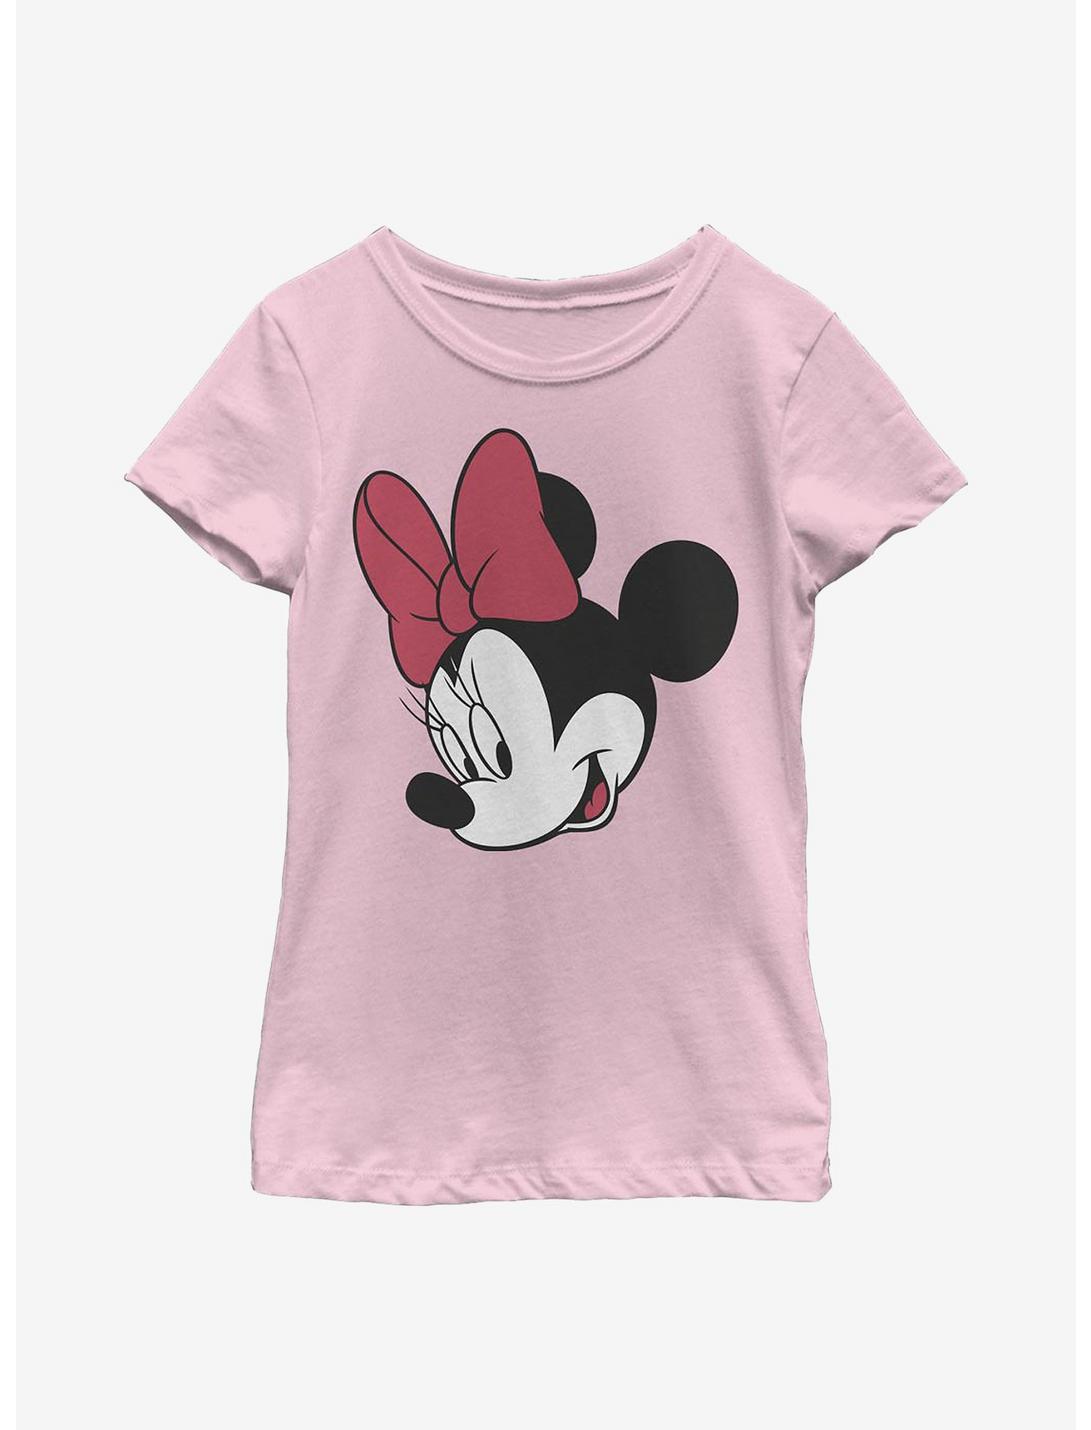 Disney Minnie Mouse Best Bow Youth Girls T-Shirt, PINK, hi-res